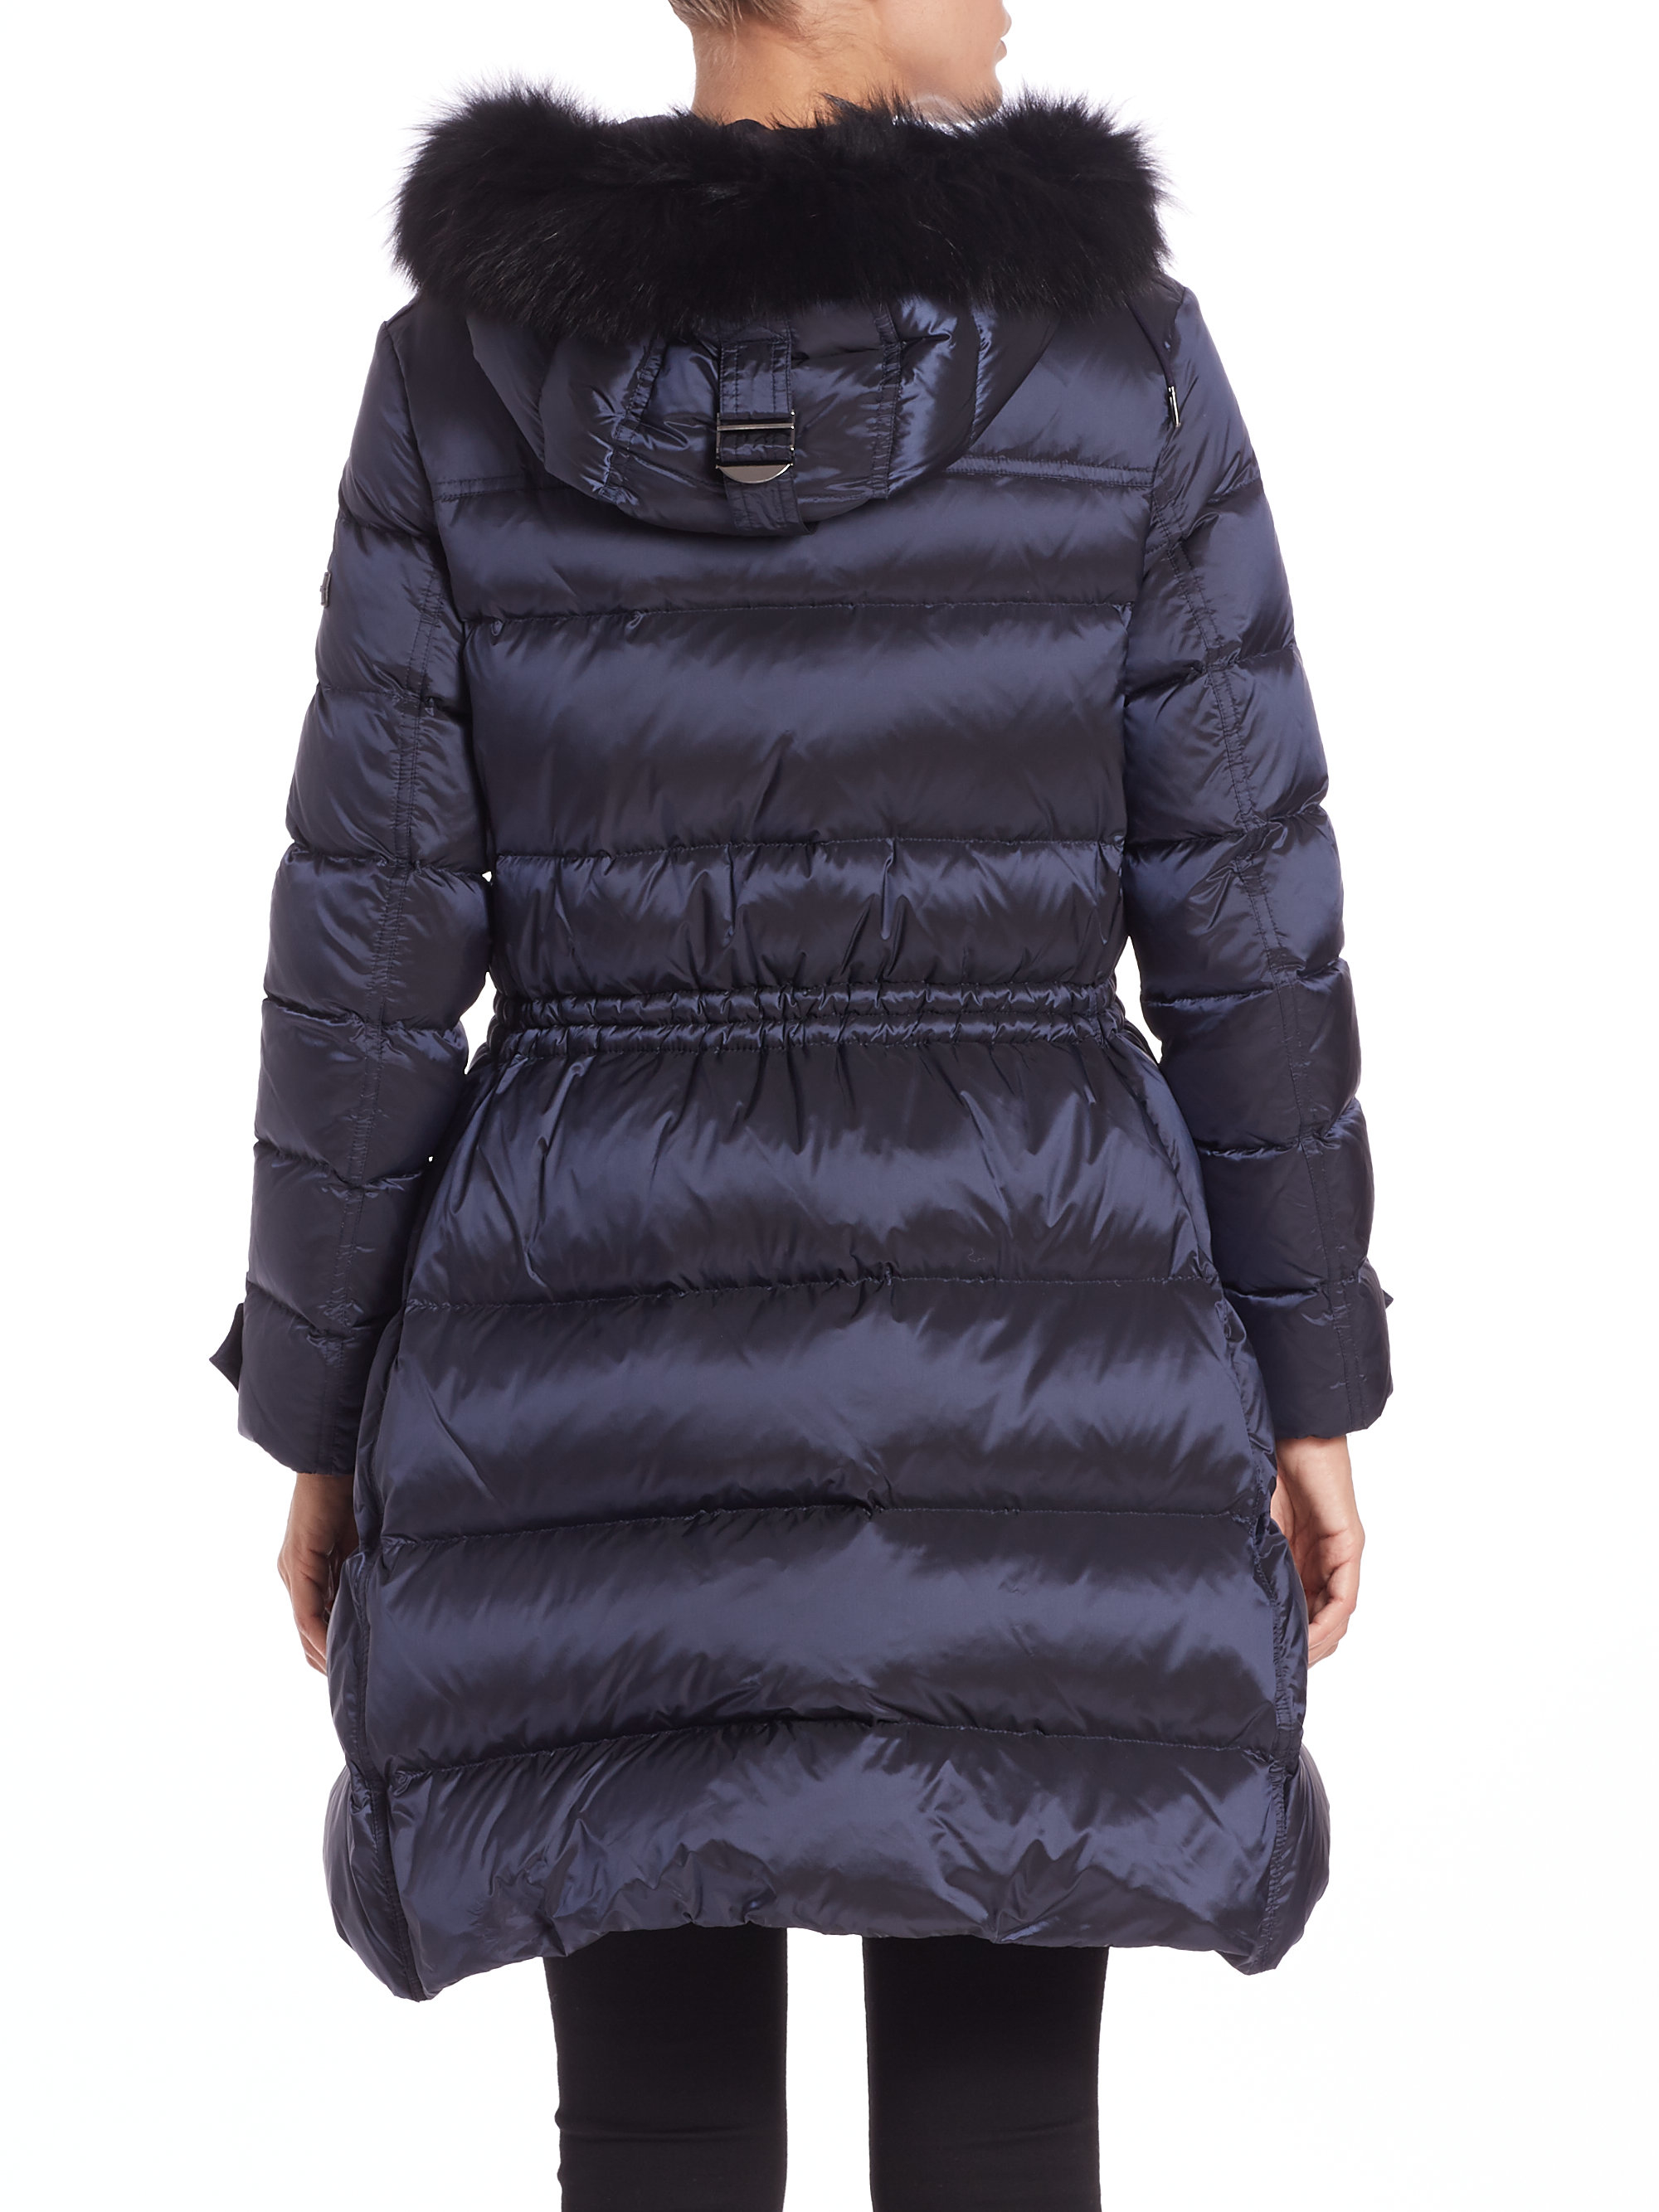 Lyst - Burberry Ribbmoore Fur-trimmed Puffer Coat in Blue